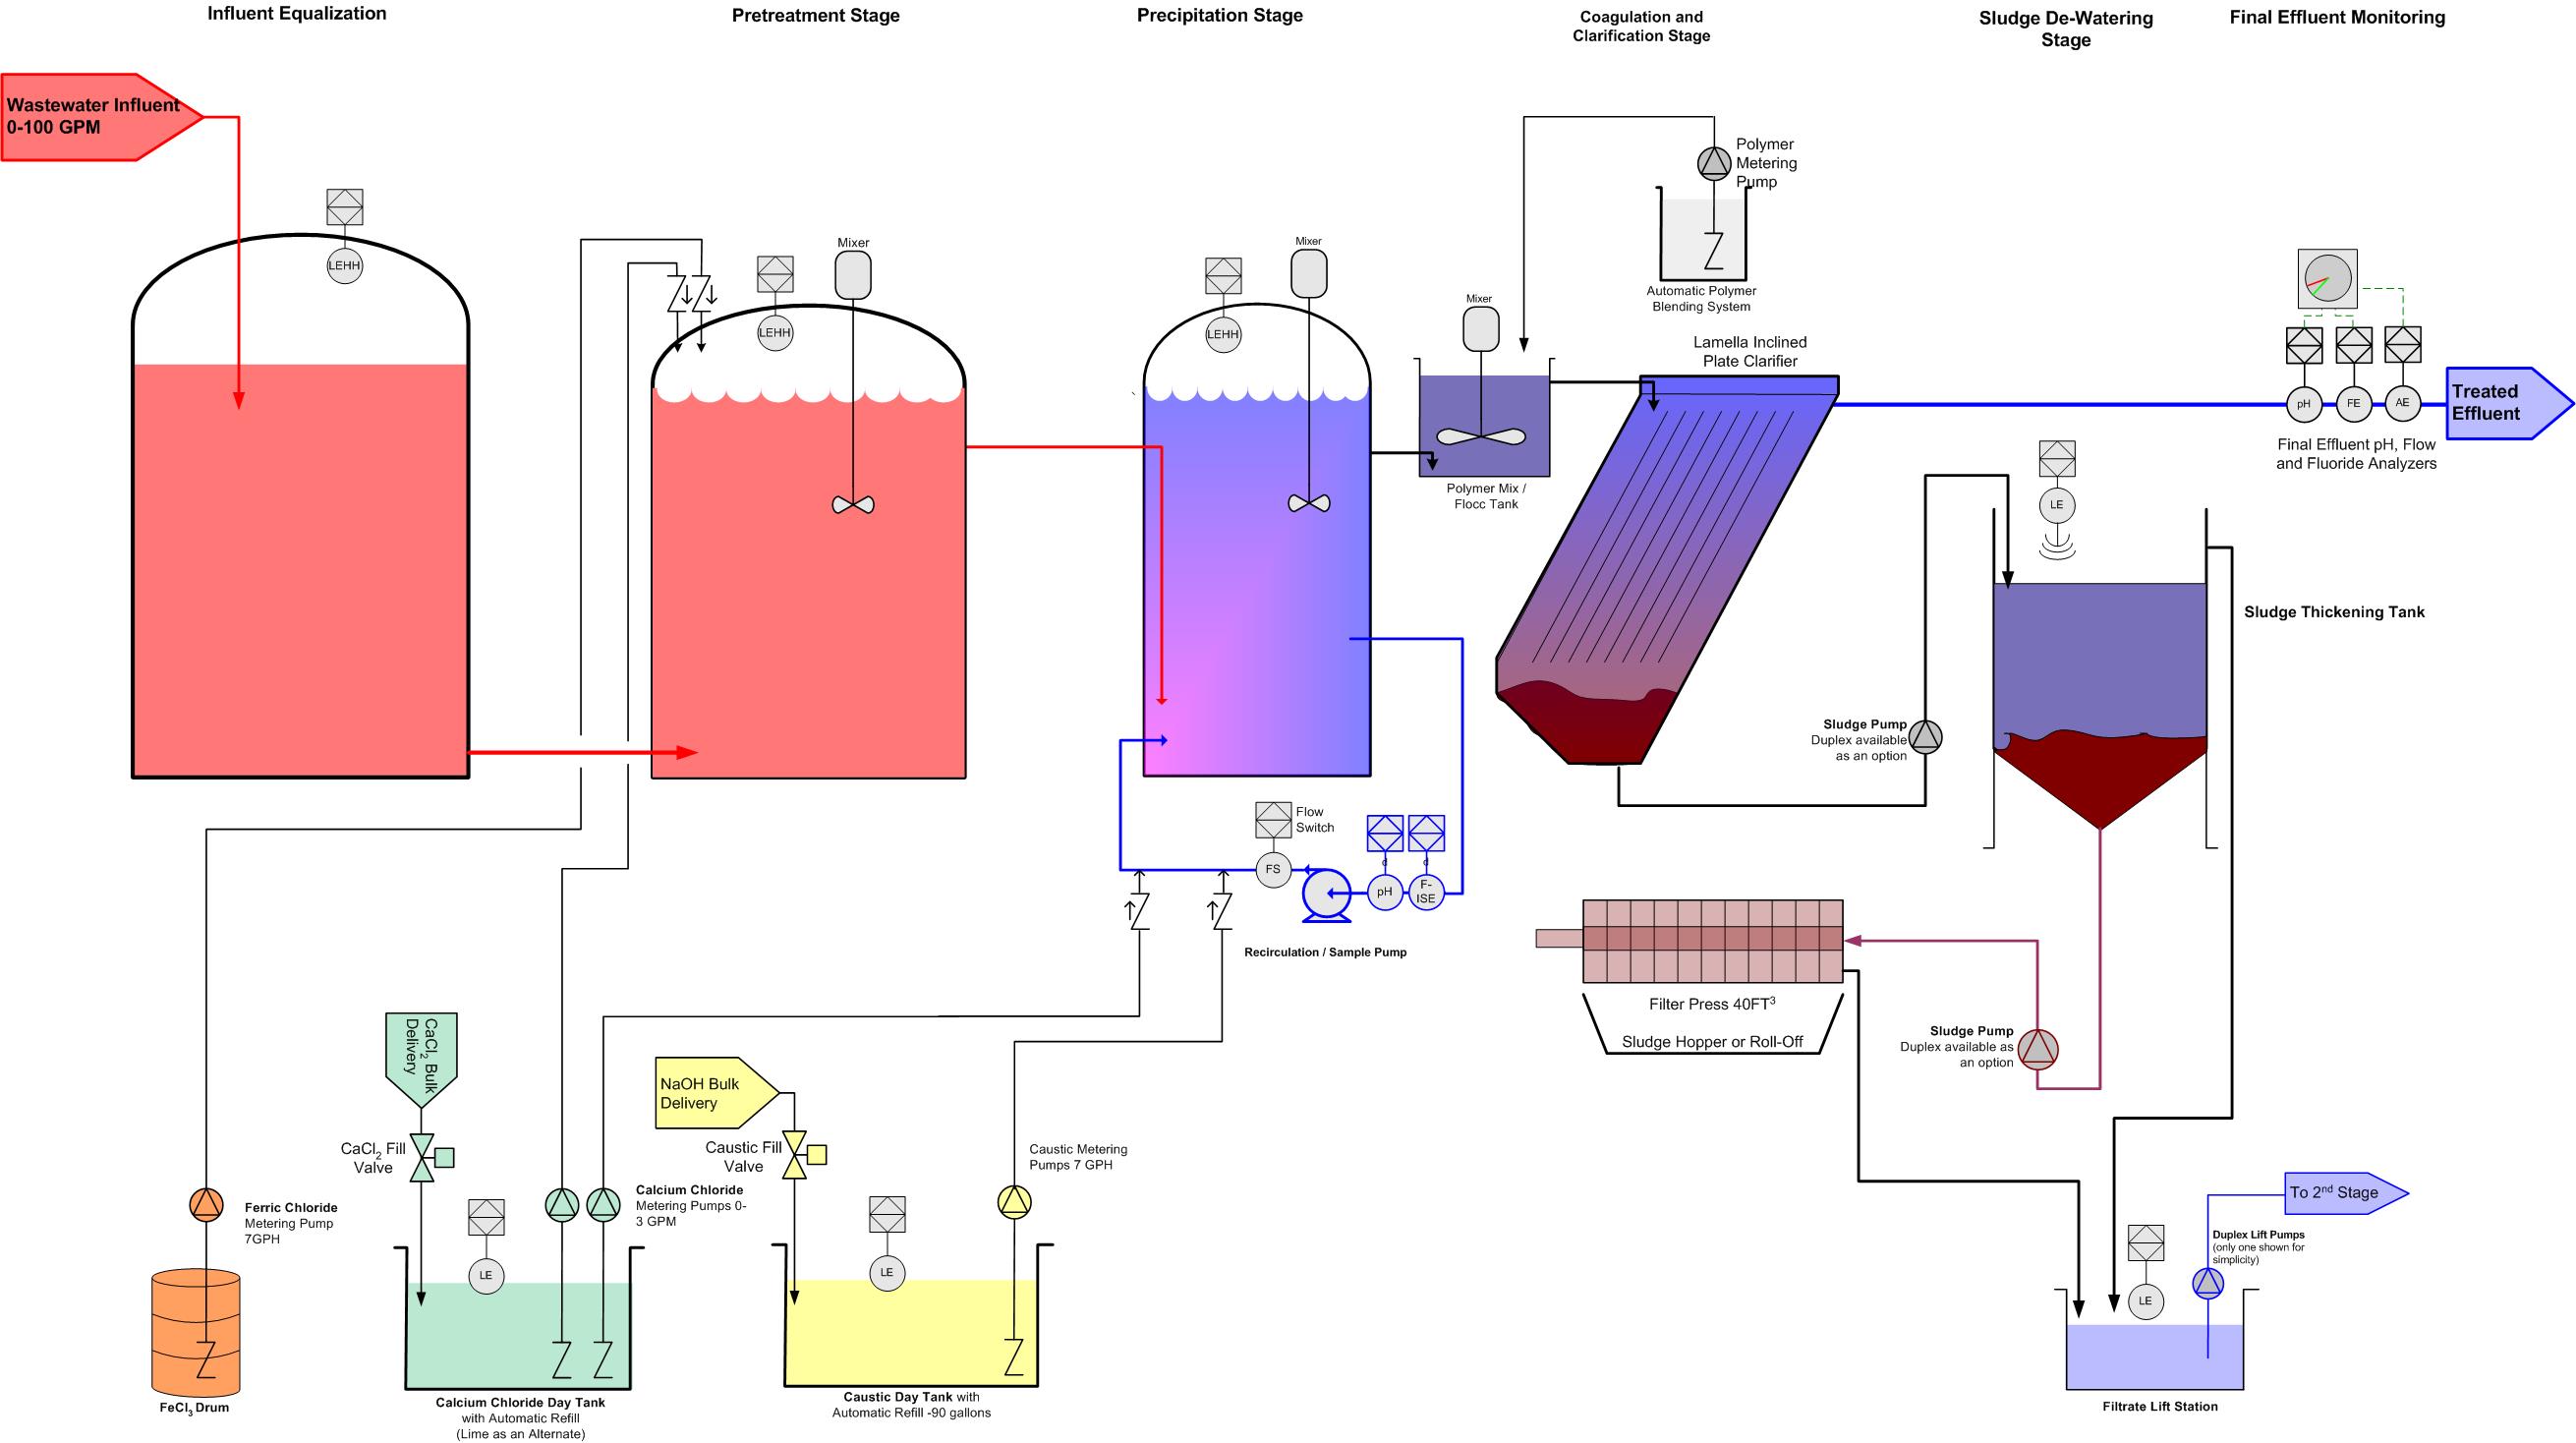 Fluoride removal system P&ID for a continuous flow fluoride system